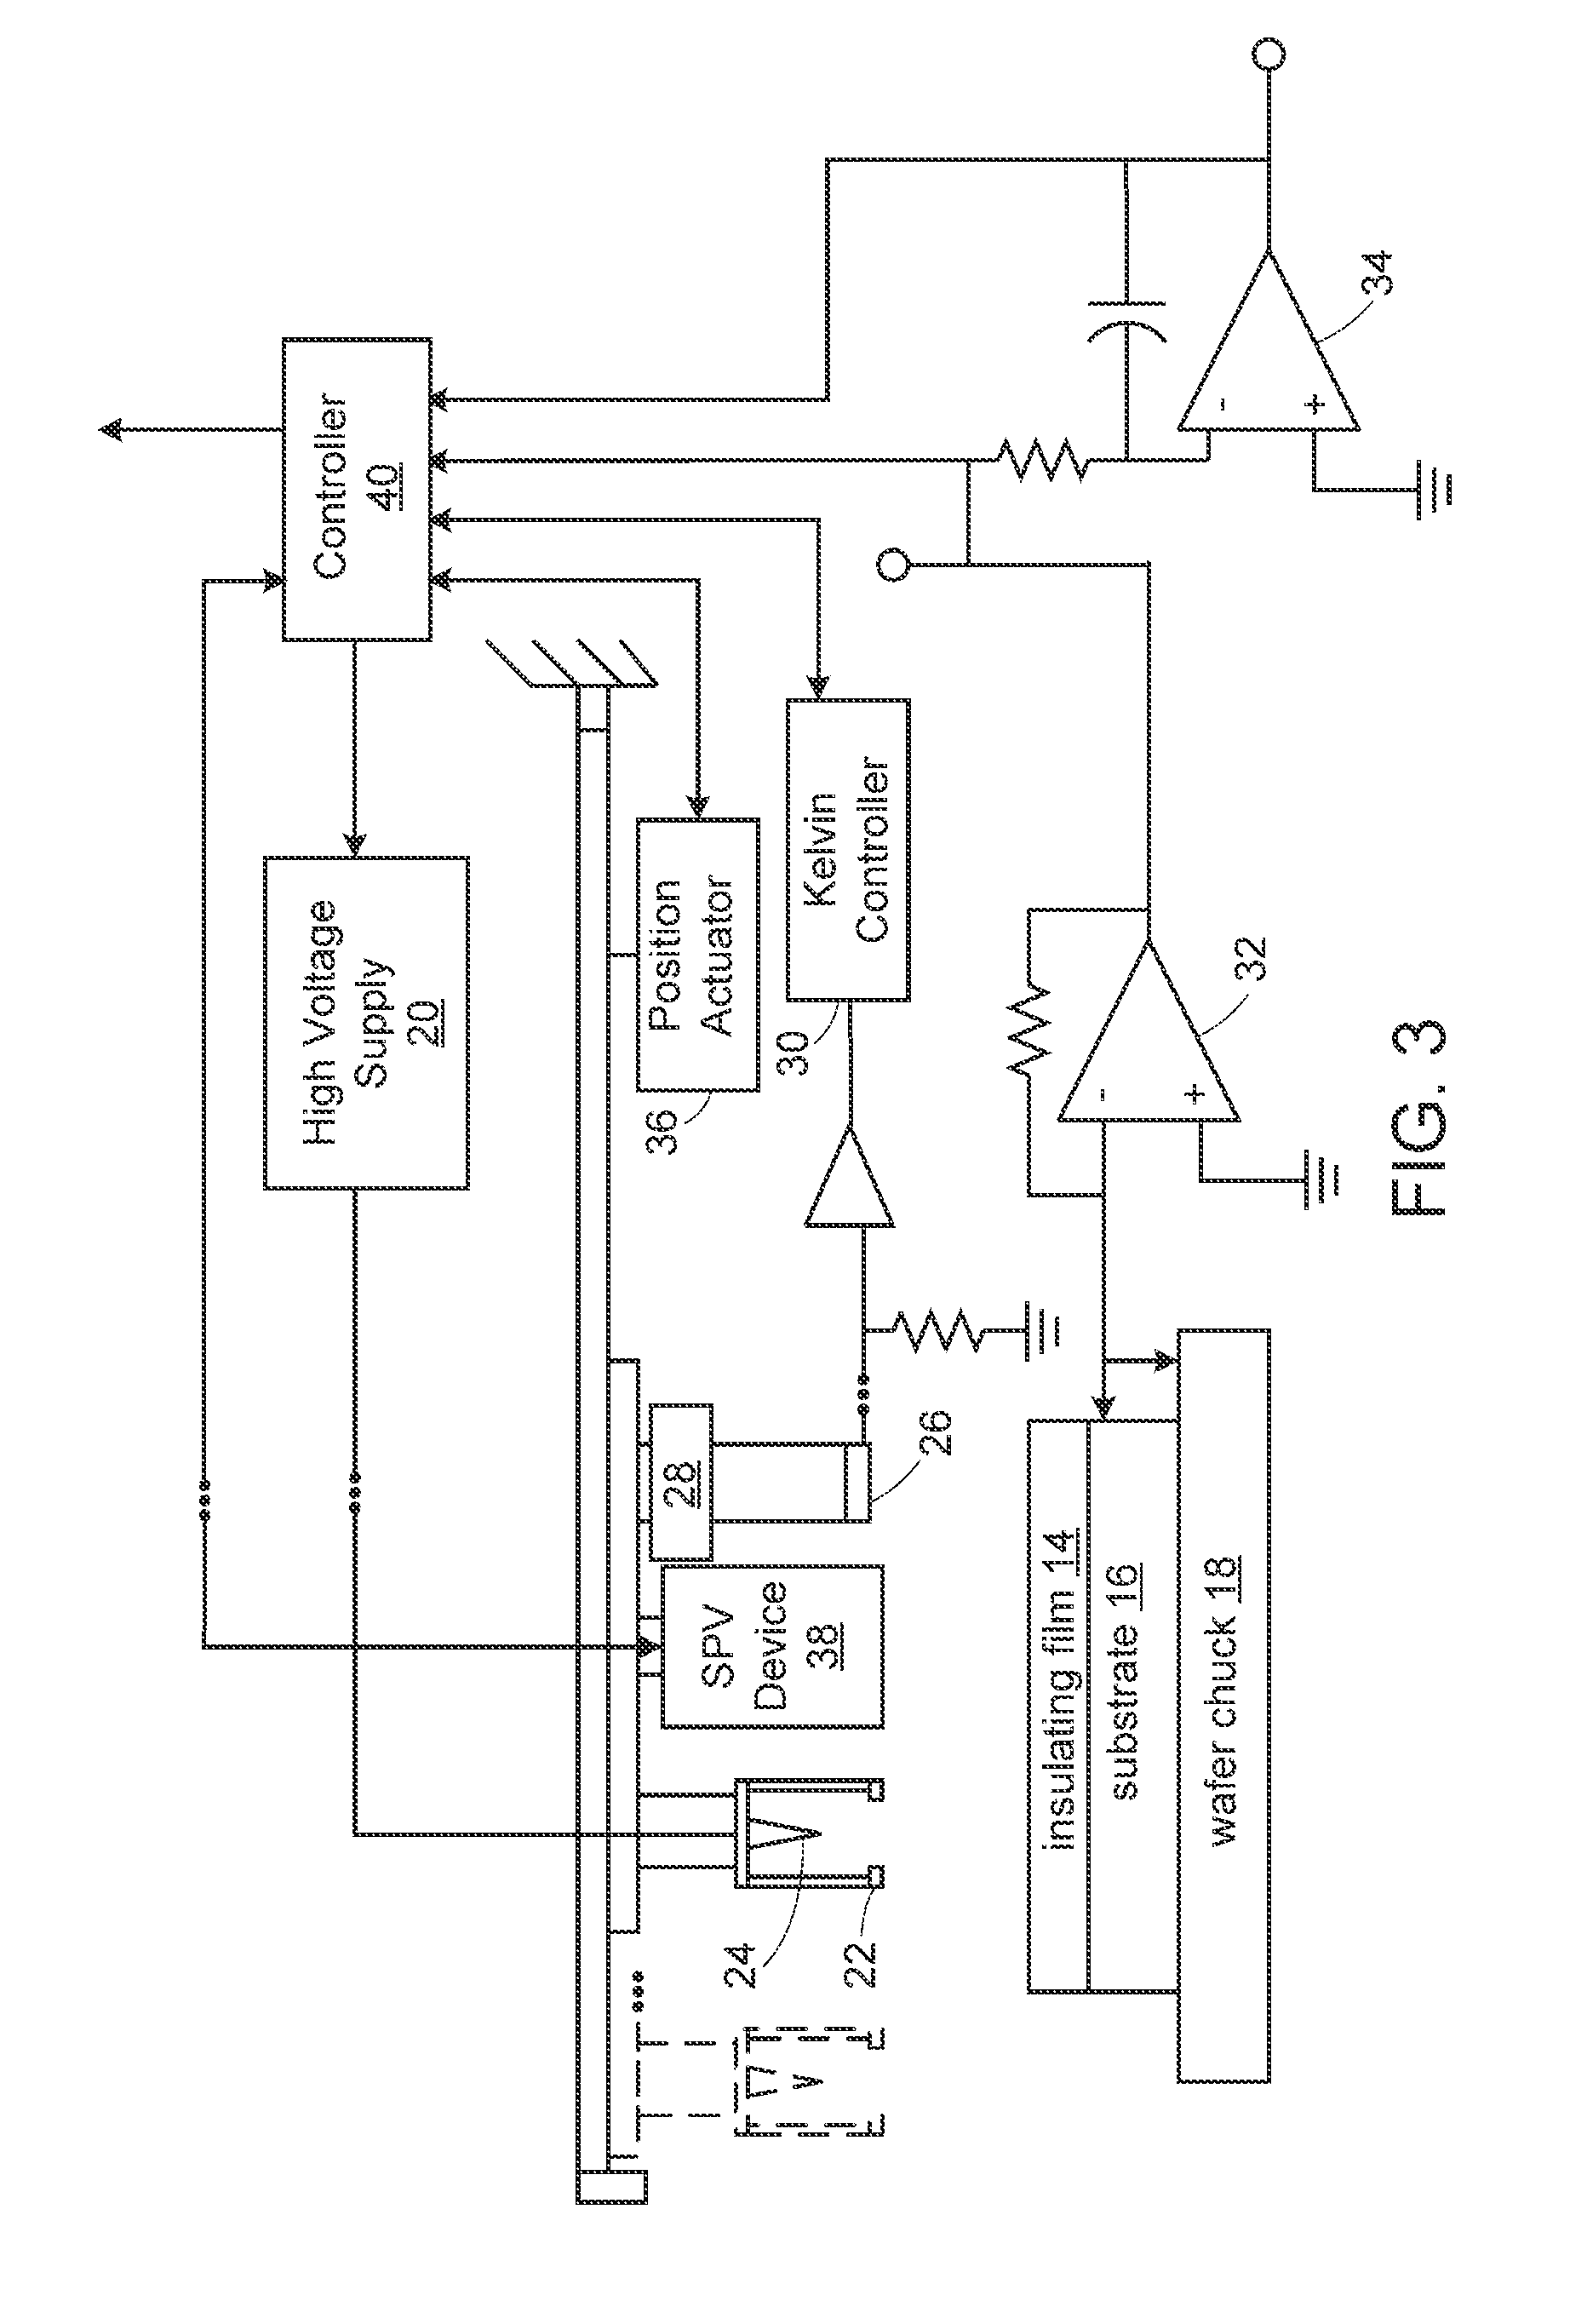 Non-contact methods for measuring electrical thickness and determining nitrogen content of insulating films